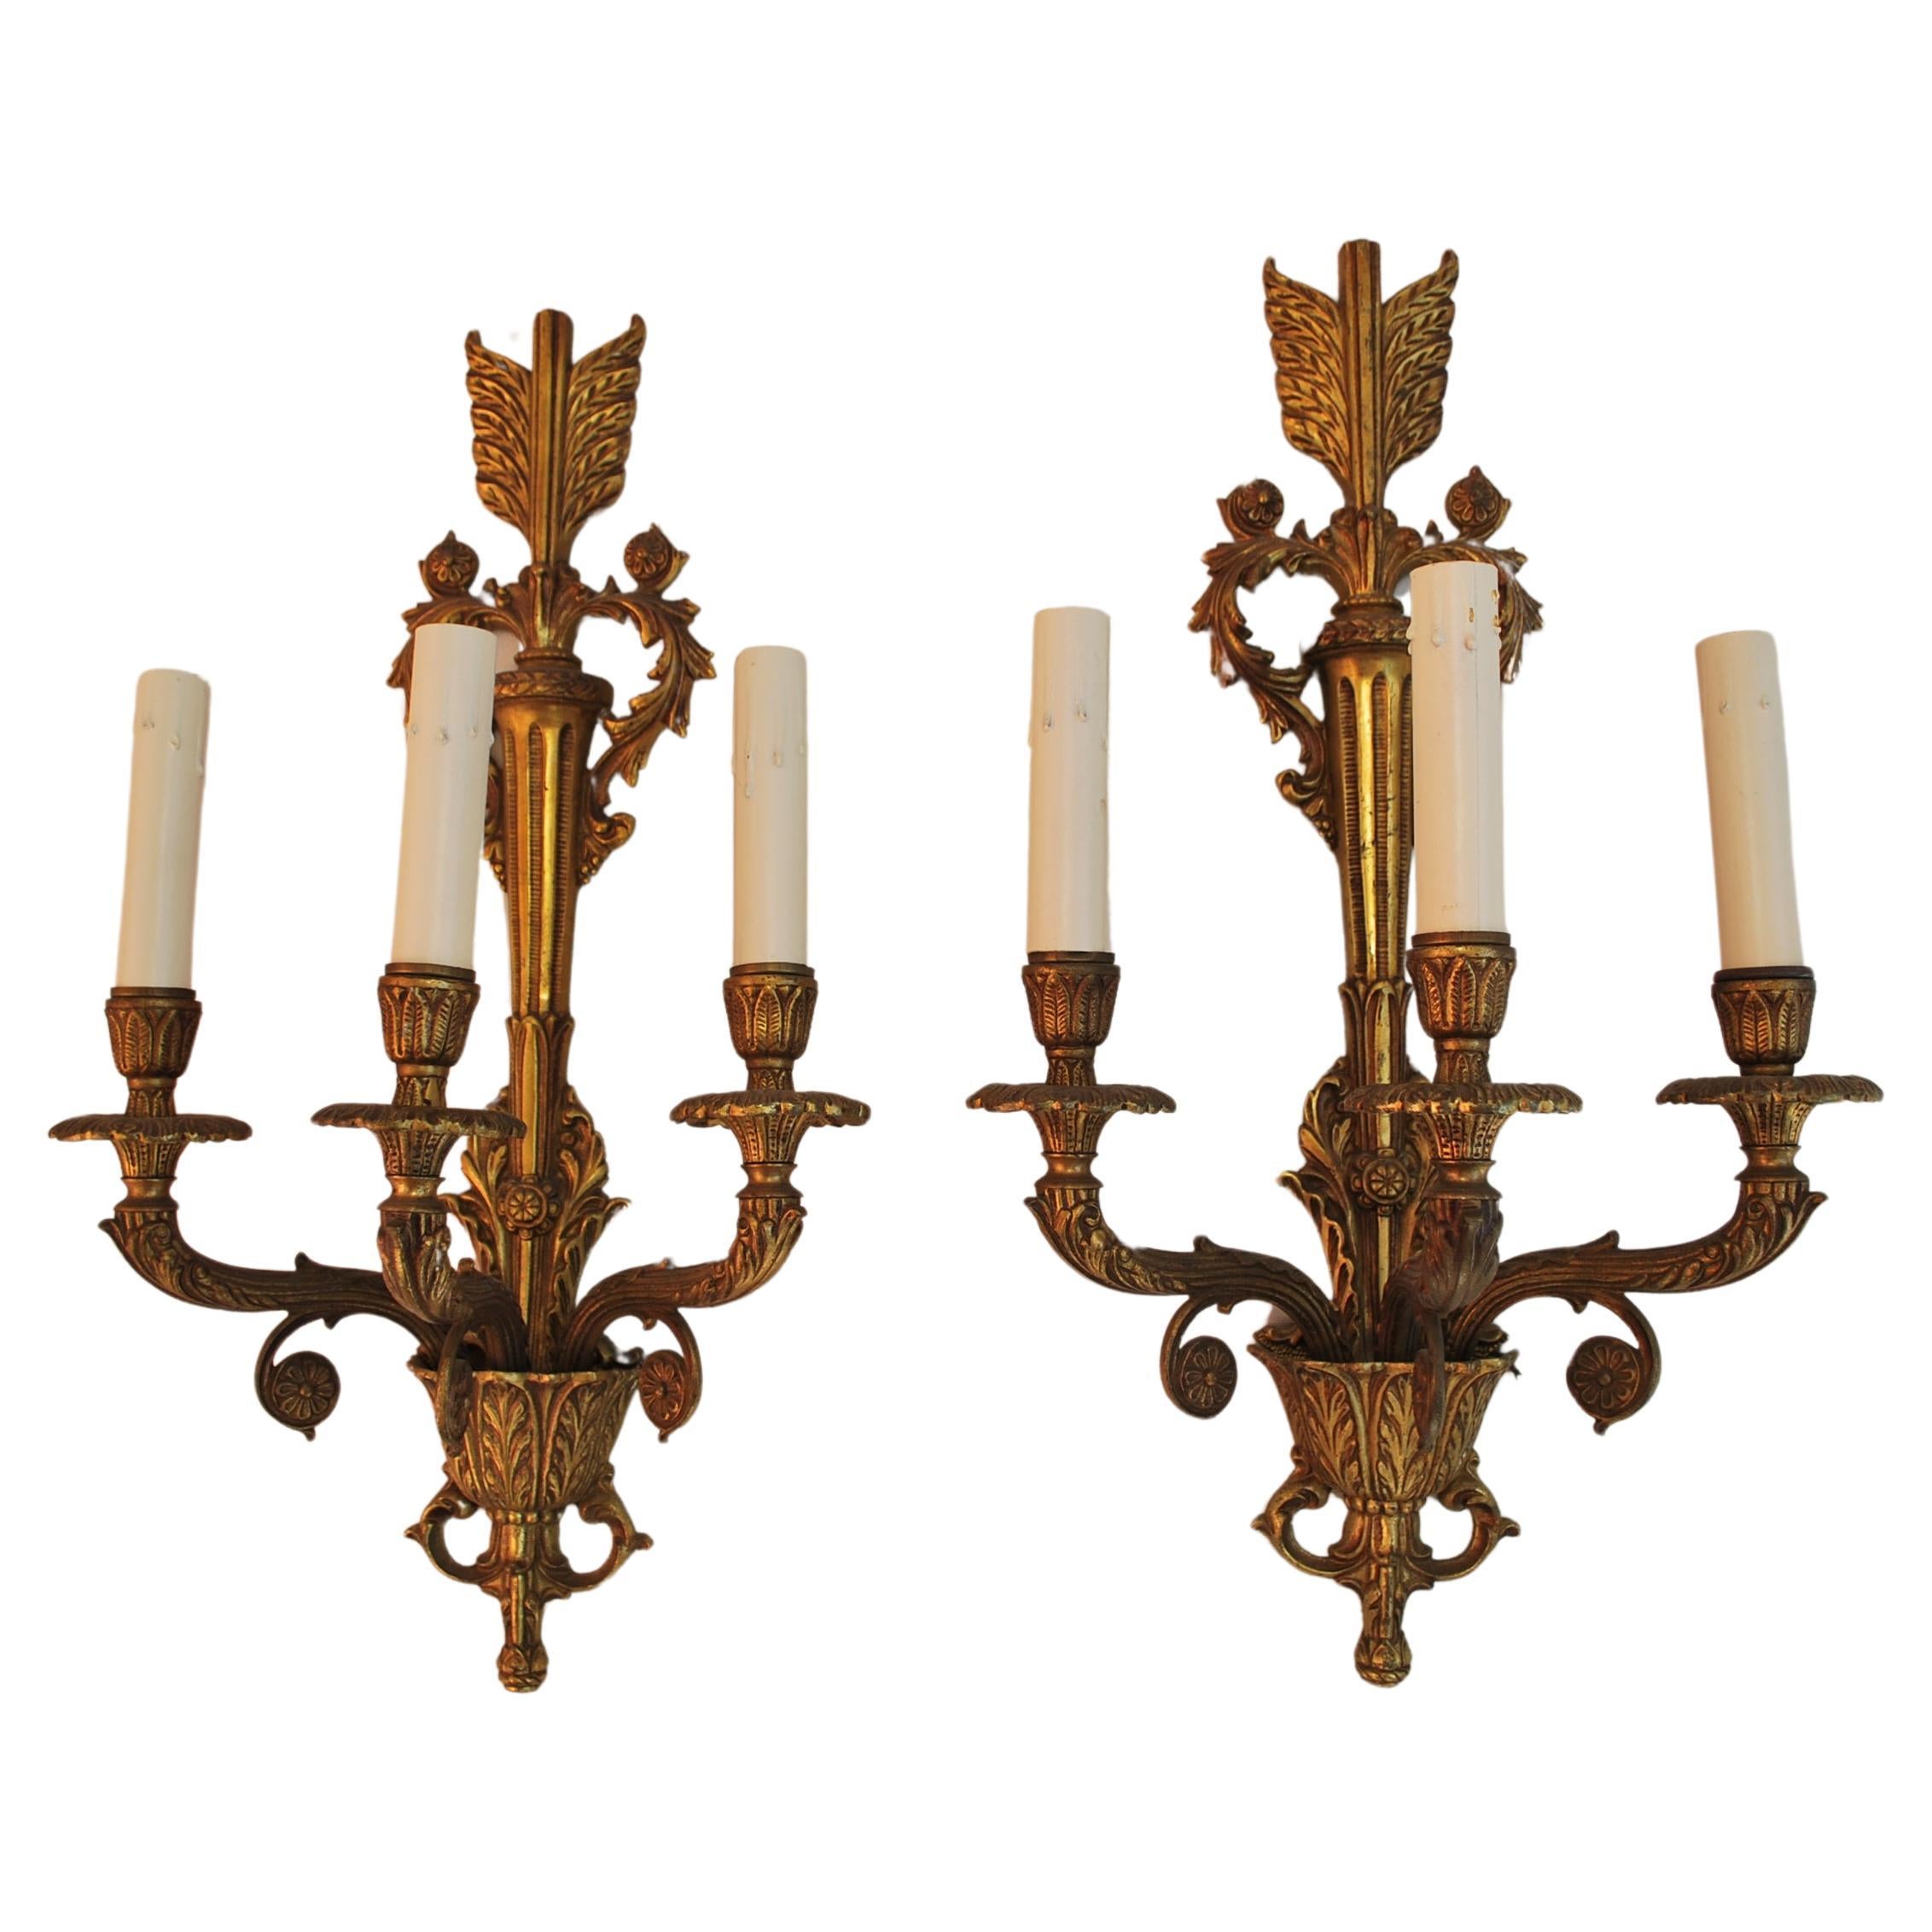 Beautiful pair of 1940's French Empire style sconces